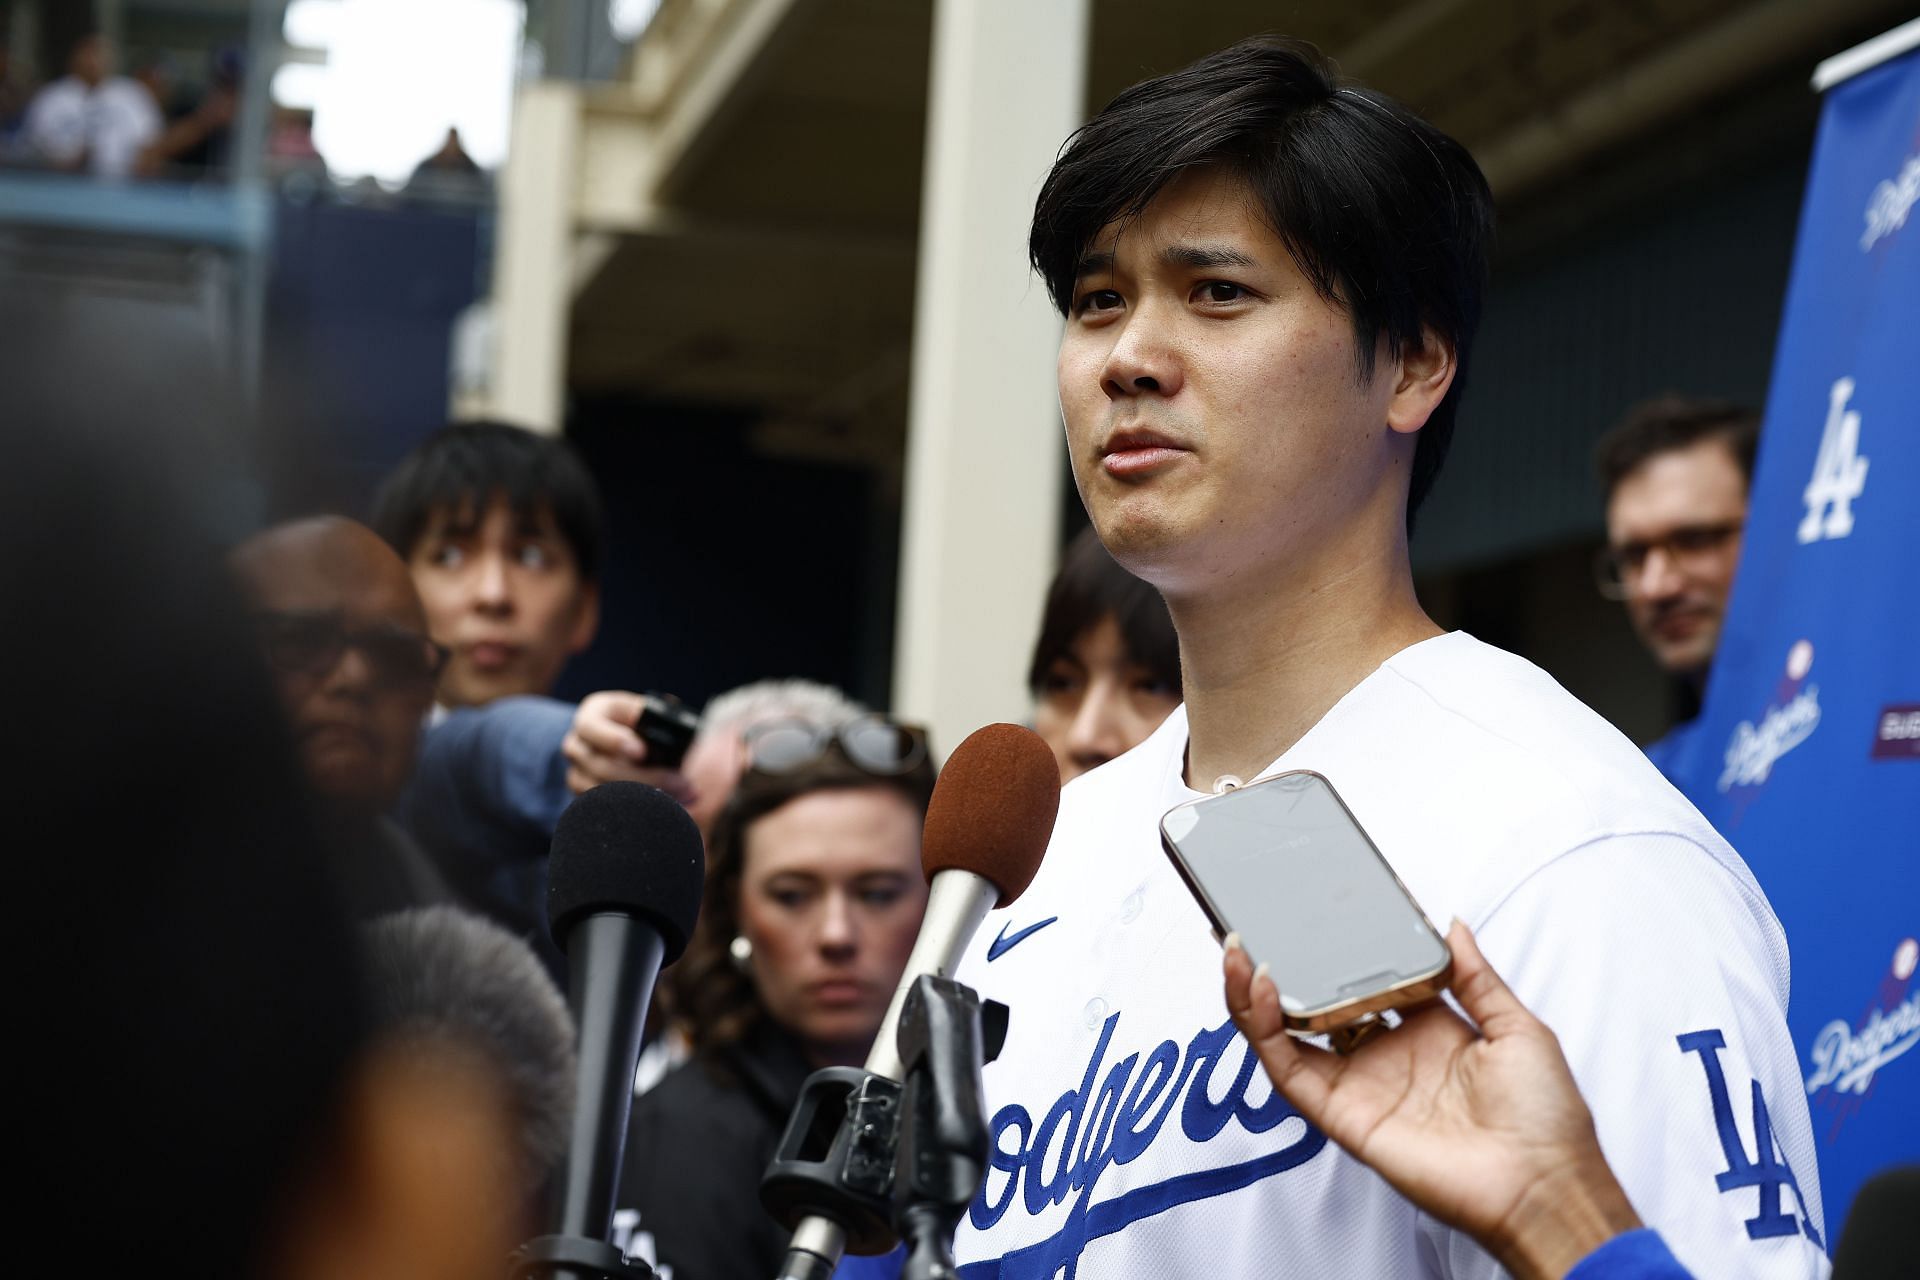 Shohei Ohtani is about to suit up for the Dodgers